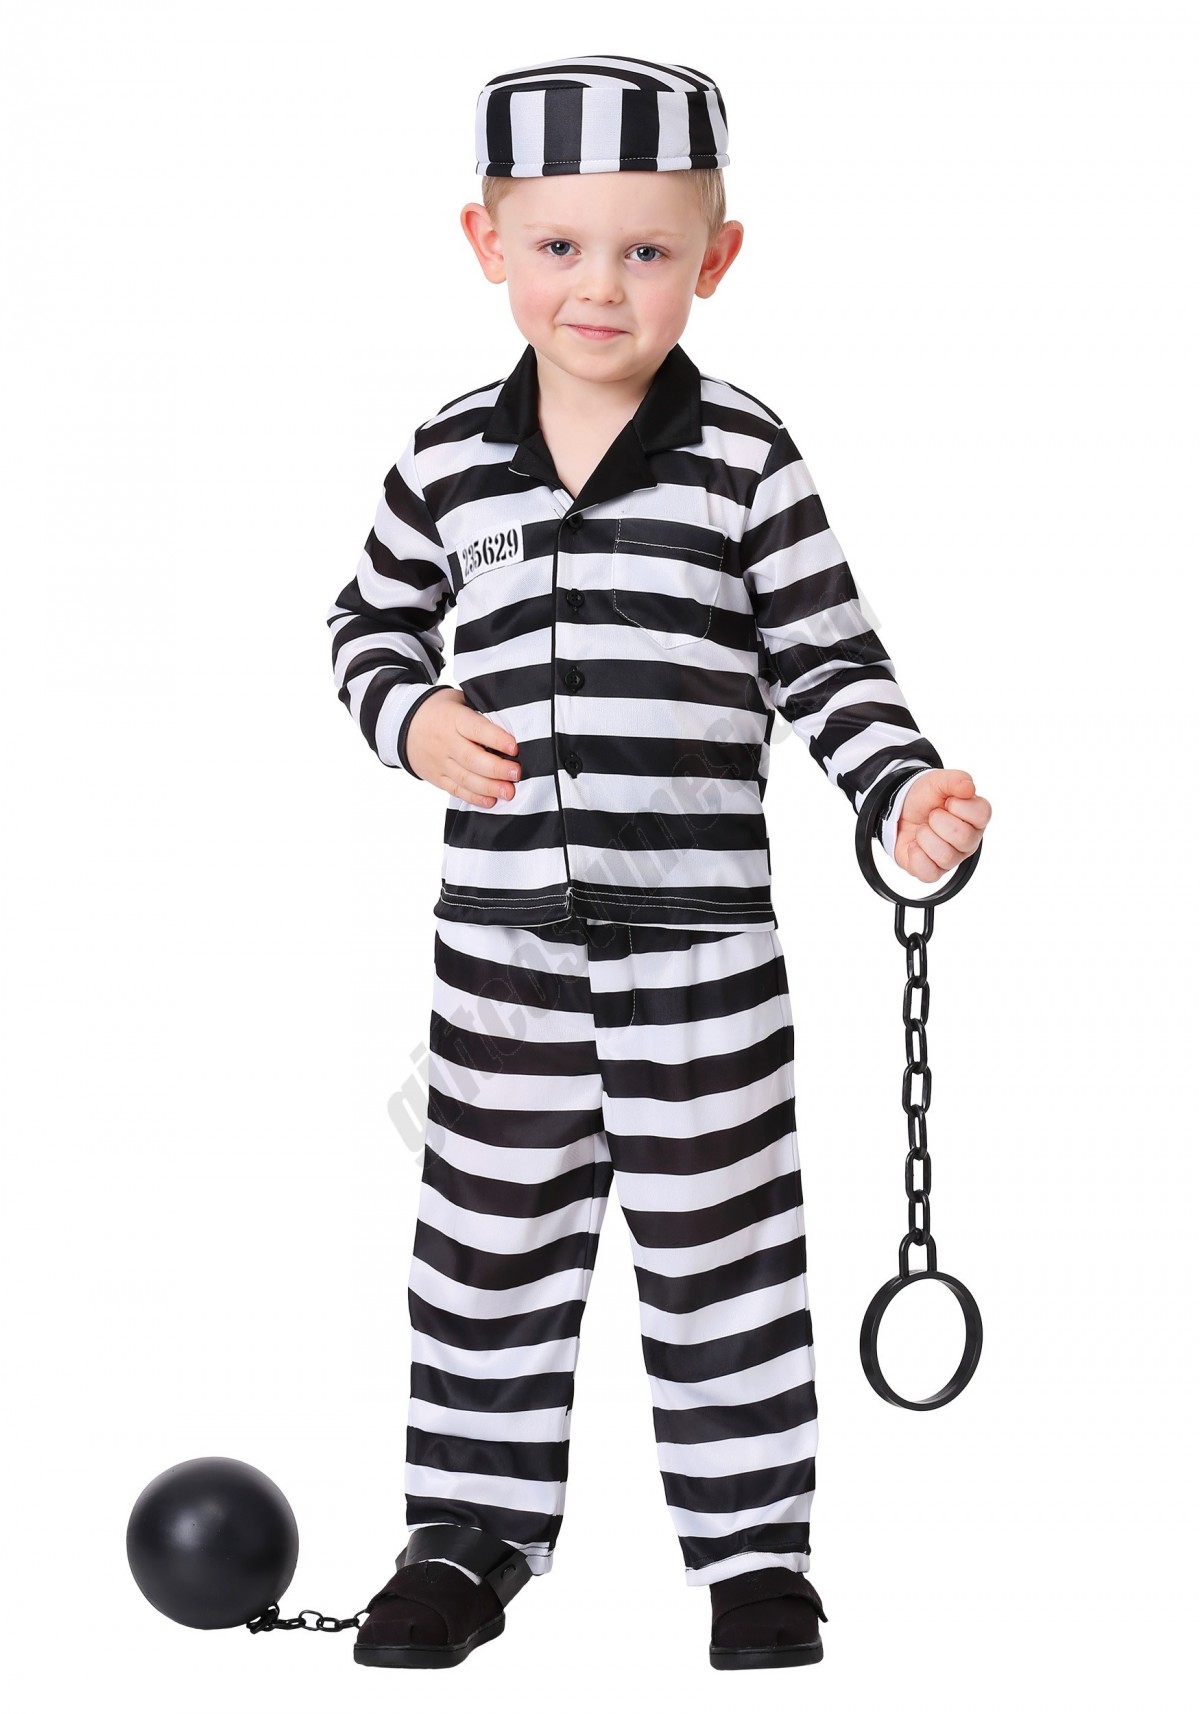 Toddler Delluxe Button Down Boys Jailbird Costume Promotions - -0